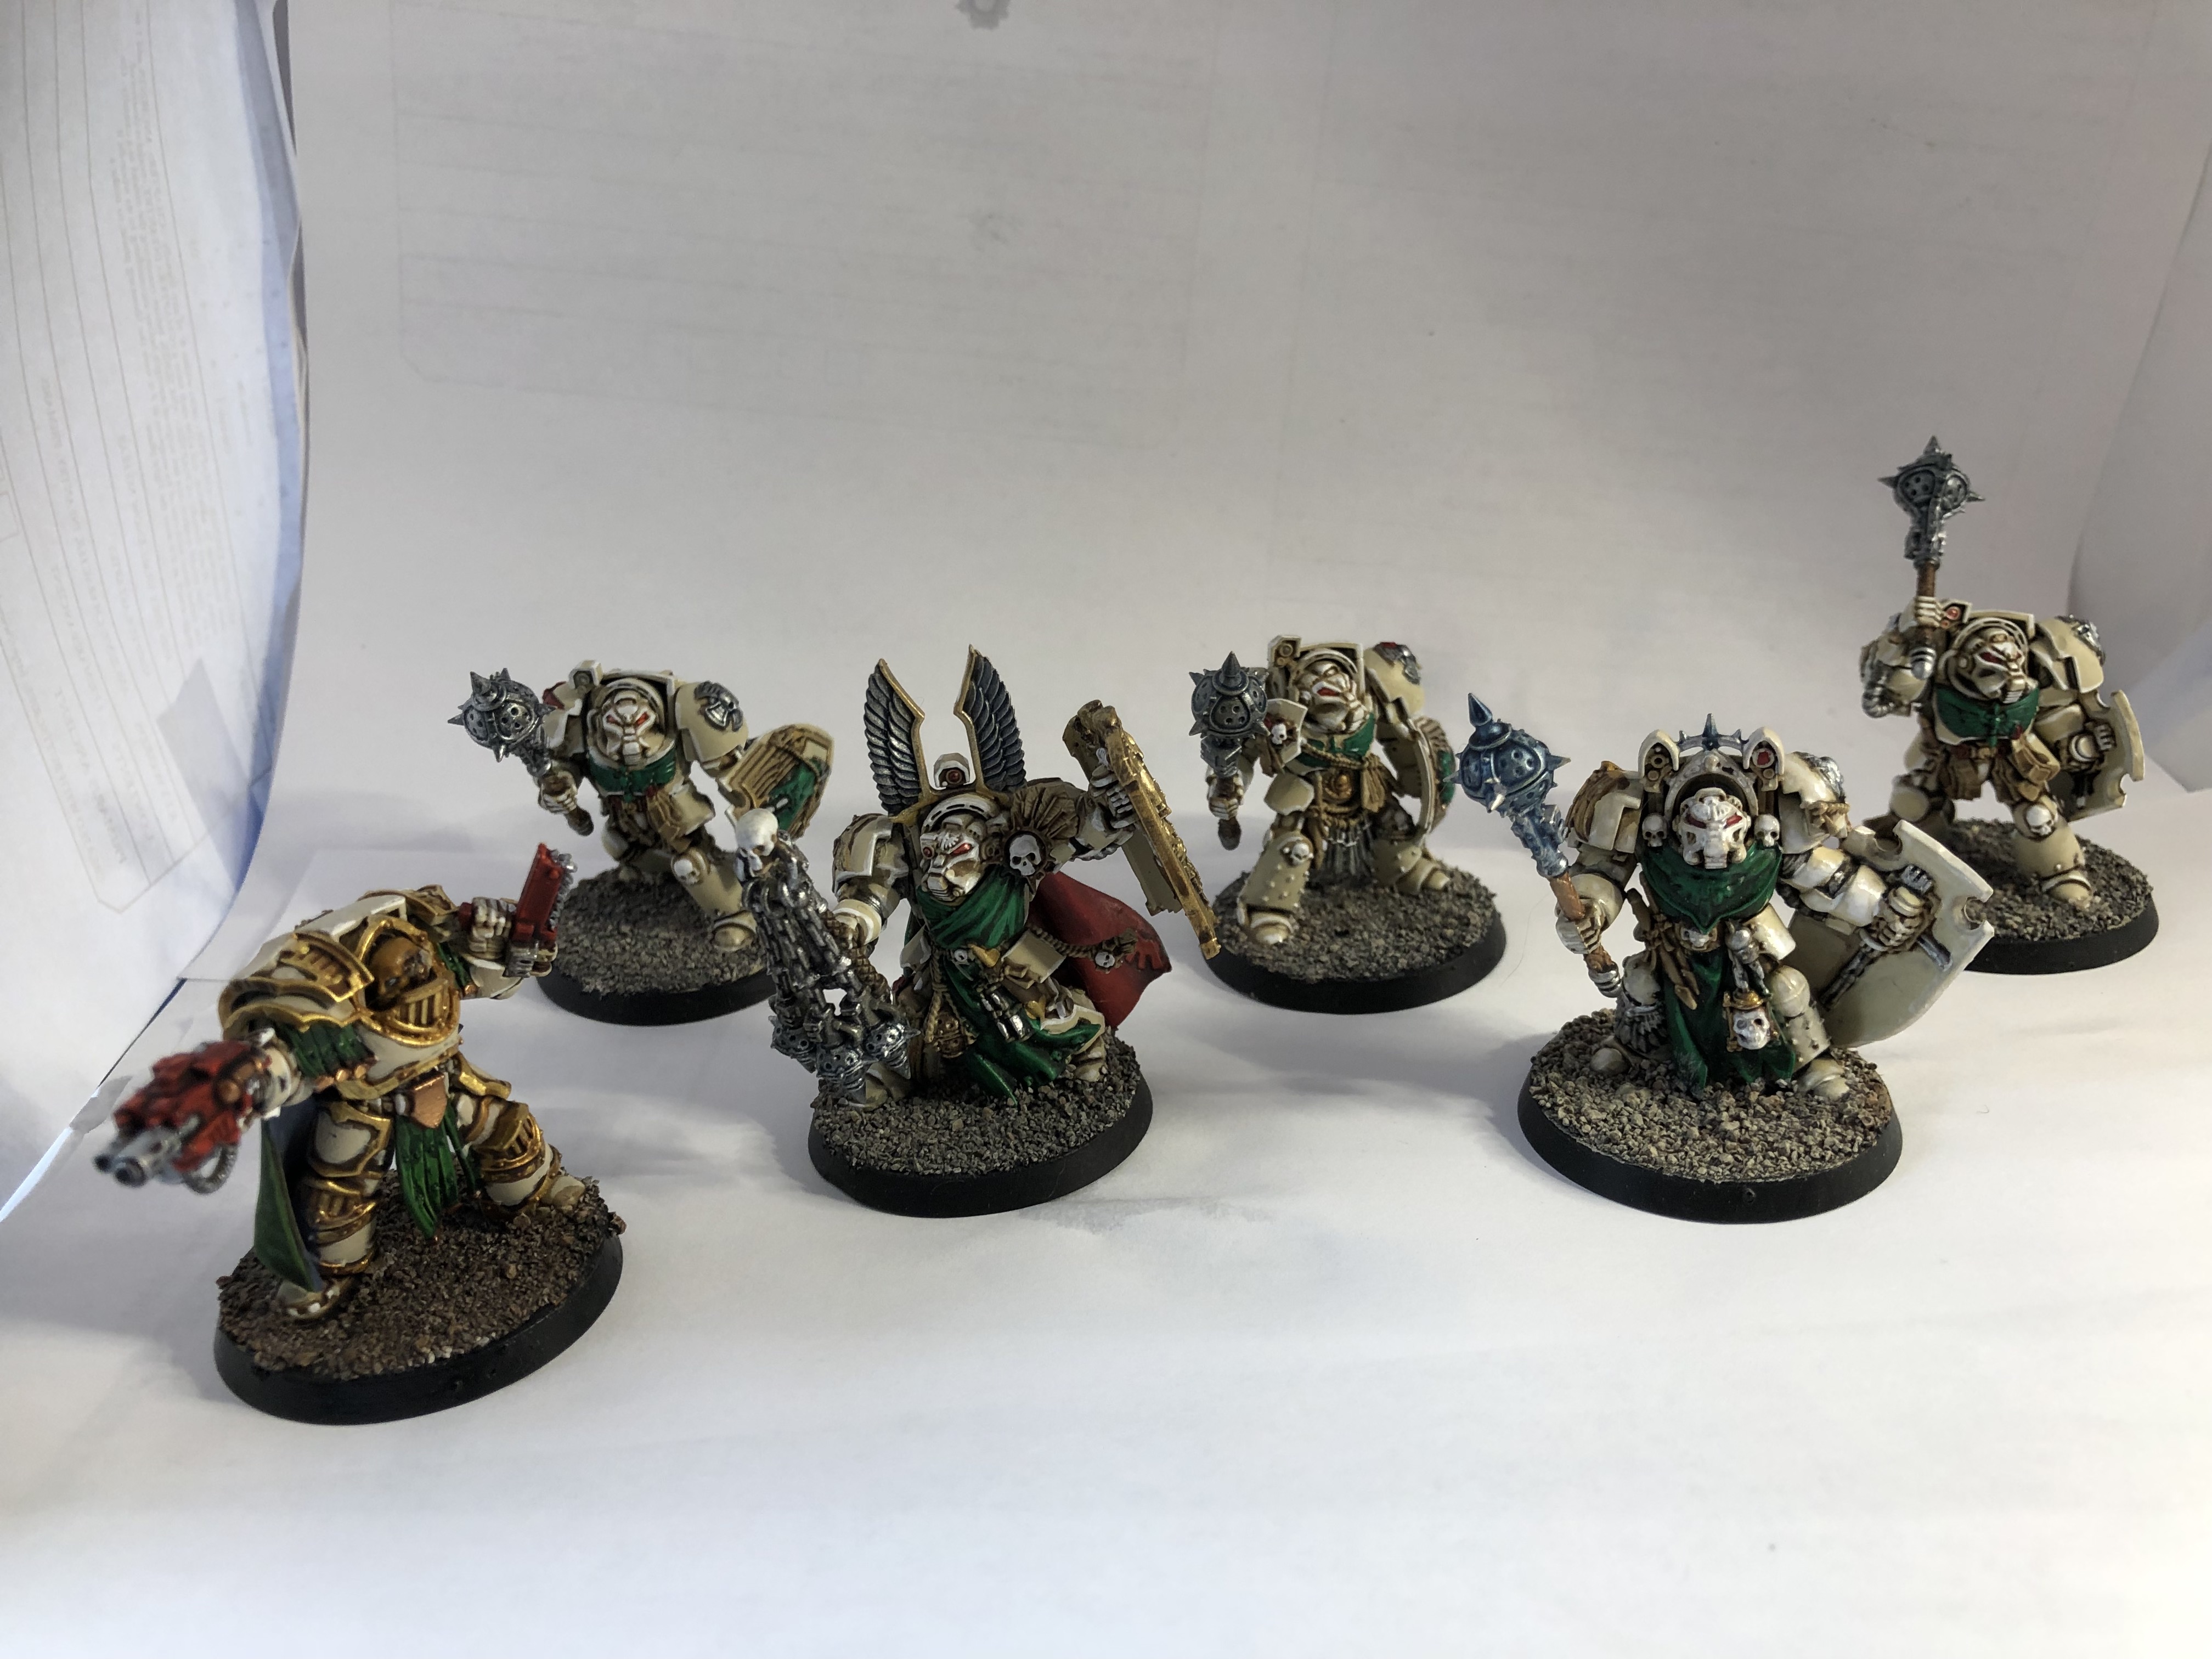 G1111 Dark Angels Deathwing Command Squad Fronts x 5 